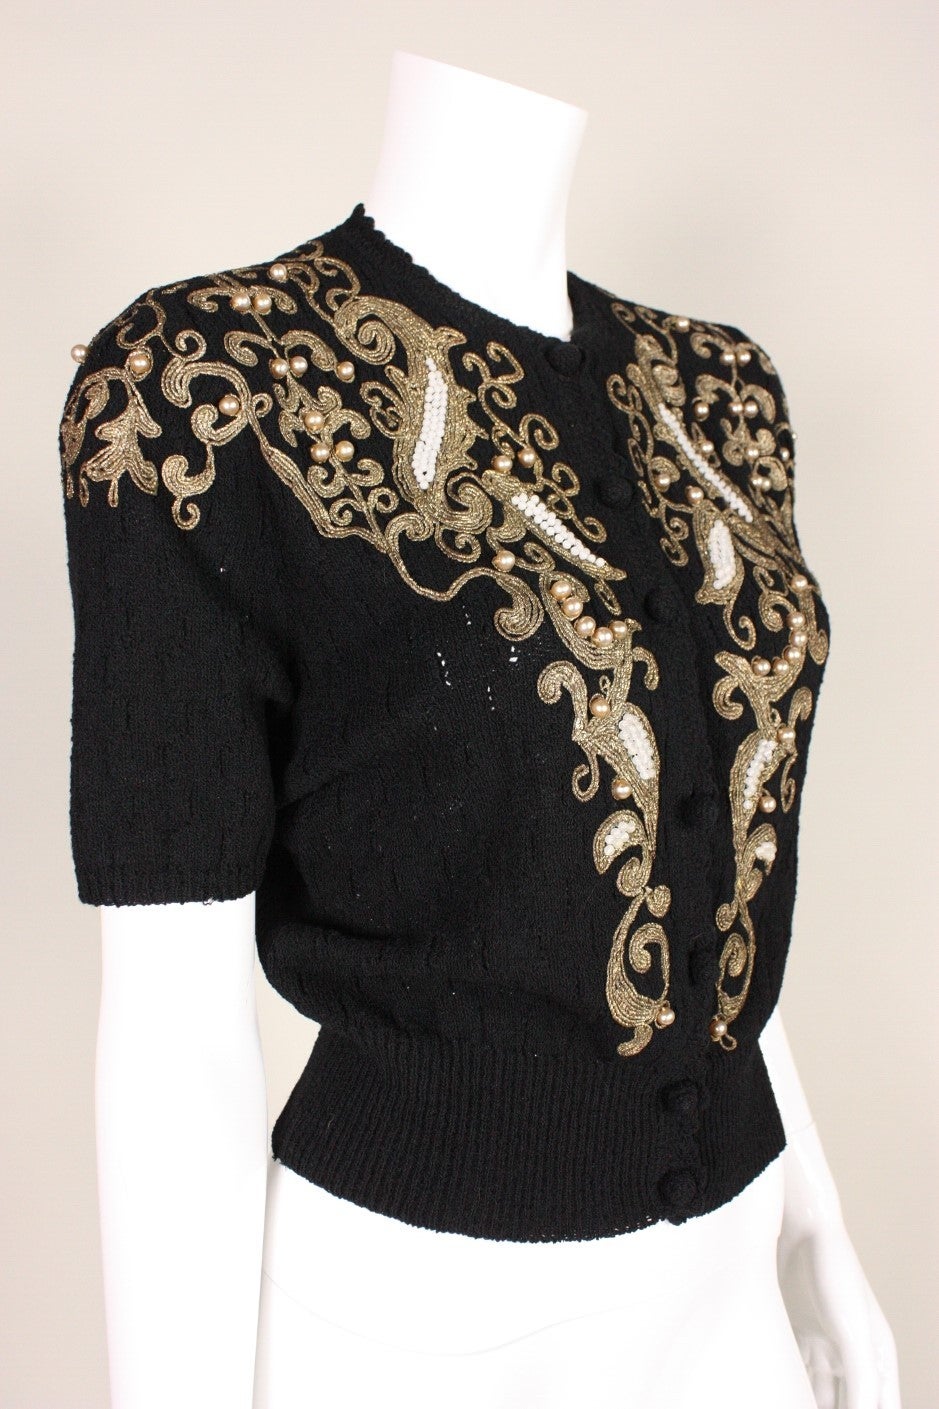 Vintage sweater likely dates to the 1950's and is made of a black knit.  Gold bullion trim with beaded accents adorns the center front, partially down the sleeves, and across the back shoulders.  Center front button closure.  Unlined.  There is no